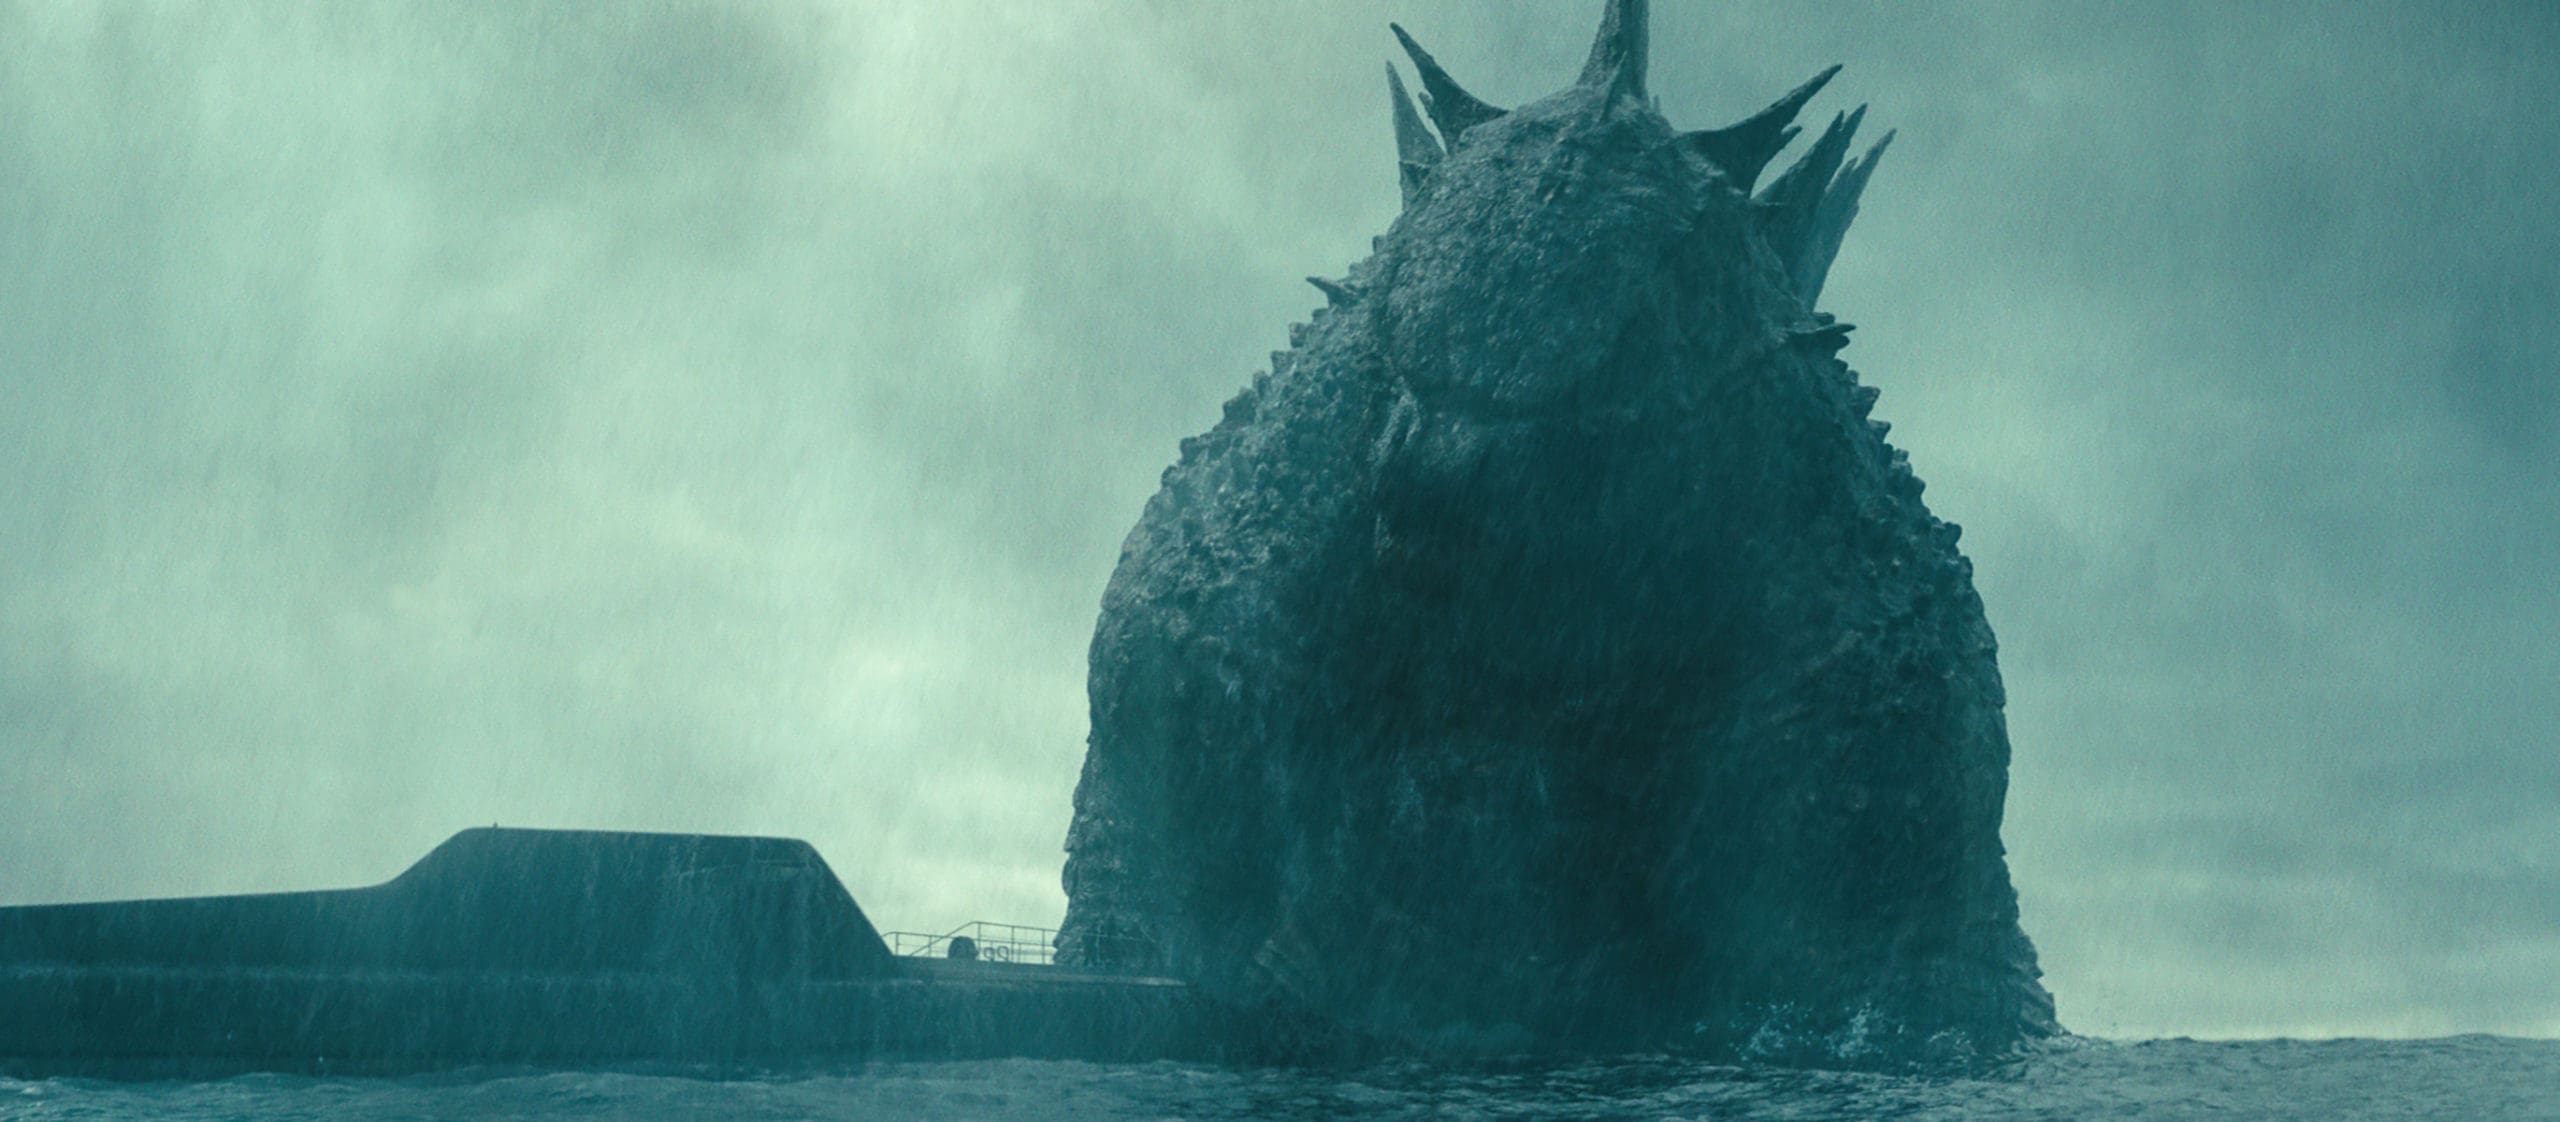 GODZILLA in Warner Bros. Pictures’ and Legendary Pictures’ action adventure “GODZILLA: KING OF THE MONSTERS,” a Warner Bros. Pictures release.